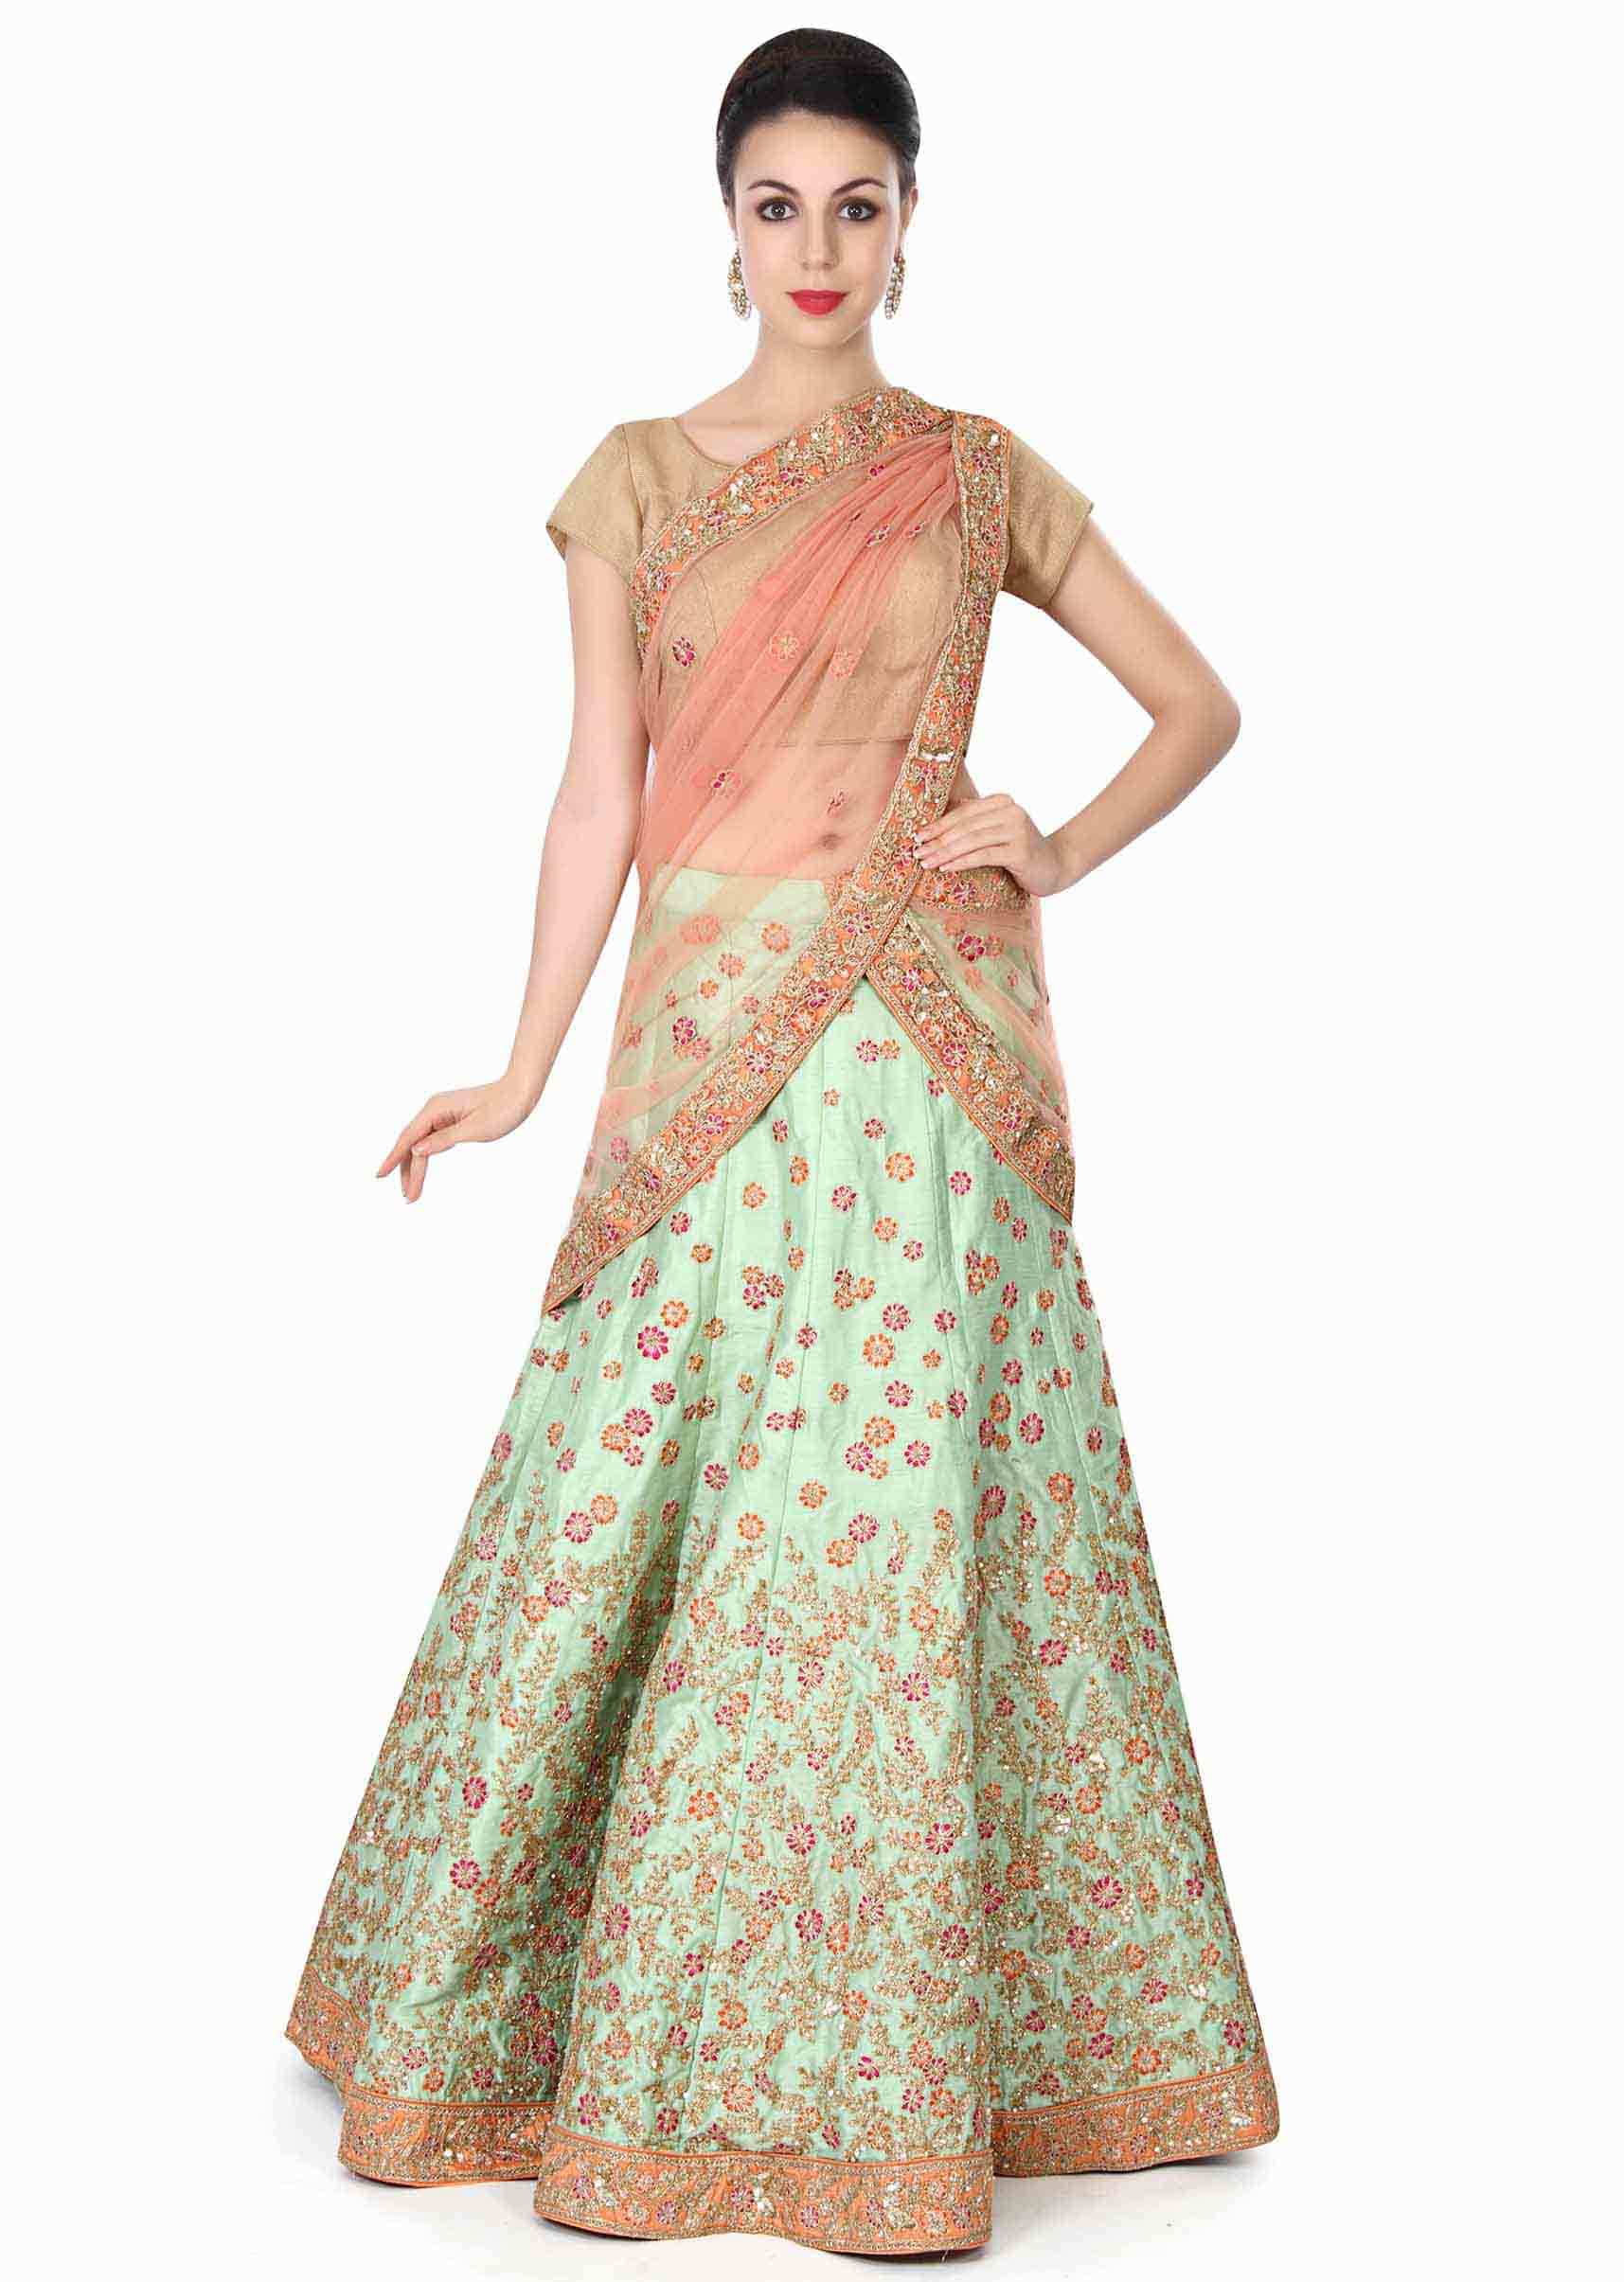 Mint Lehenga Choli With Embroidery Work In Floral Pattern Online - Kalki Fashion